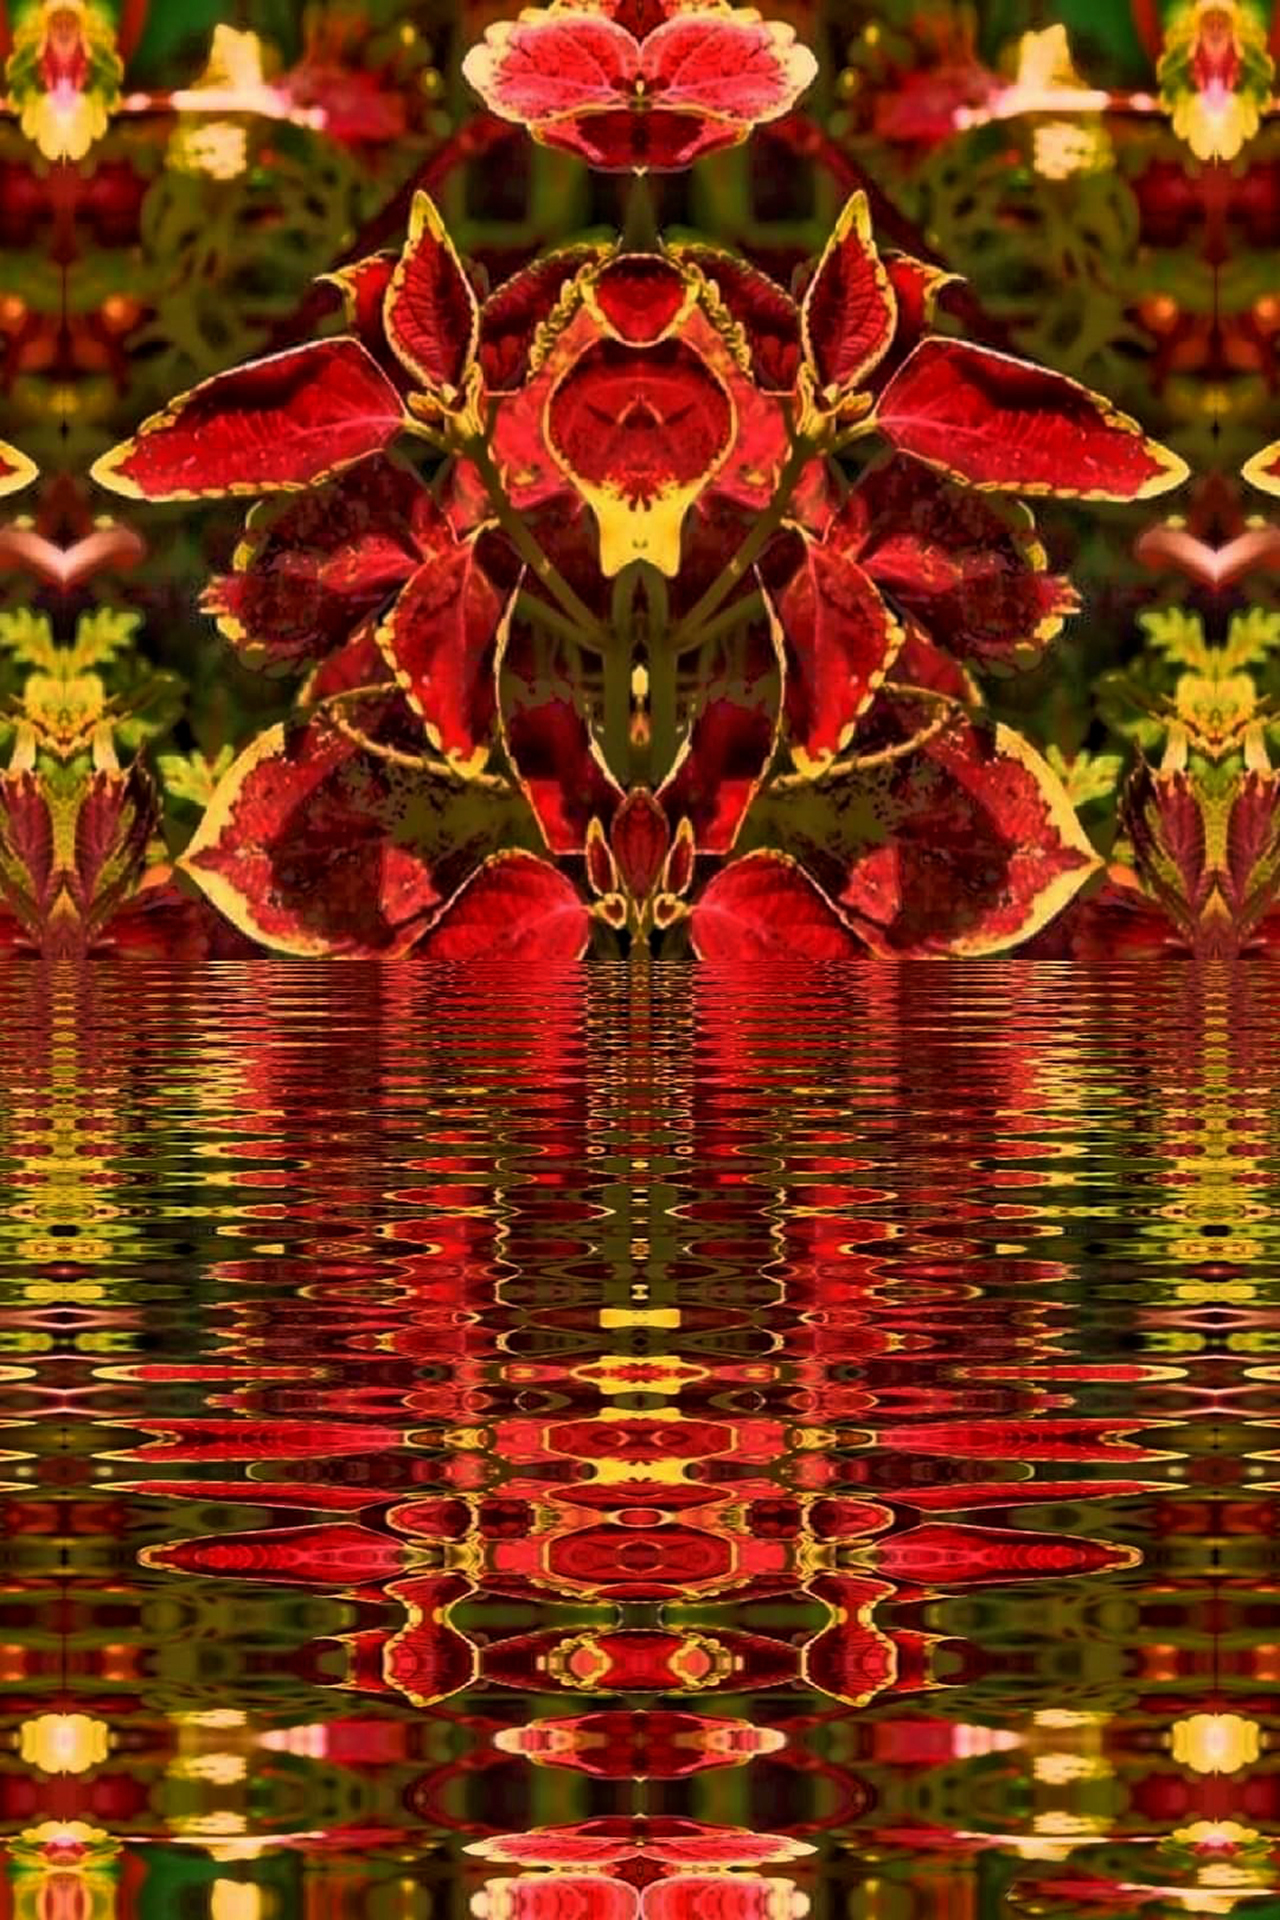 Abstract image of colorful leaves reflected in water